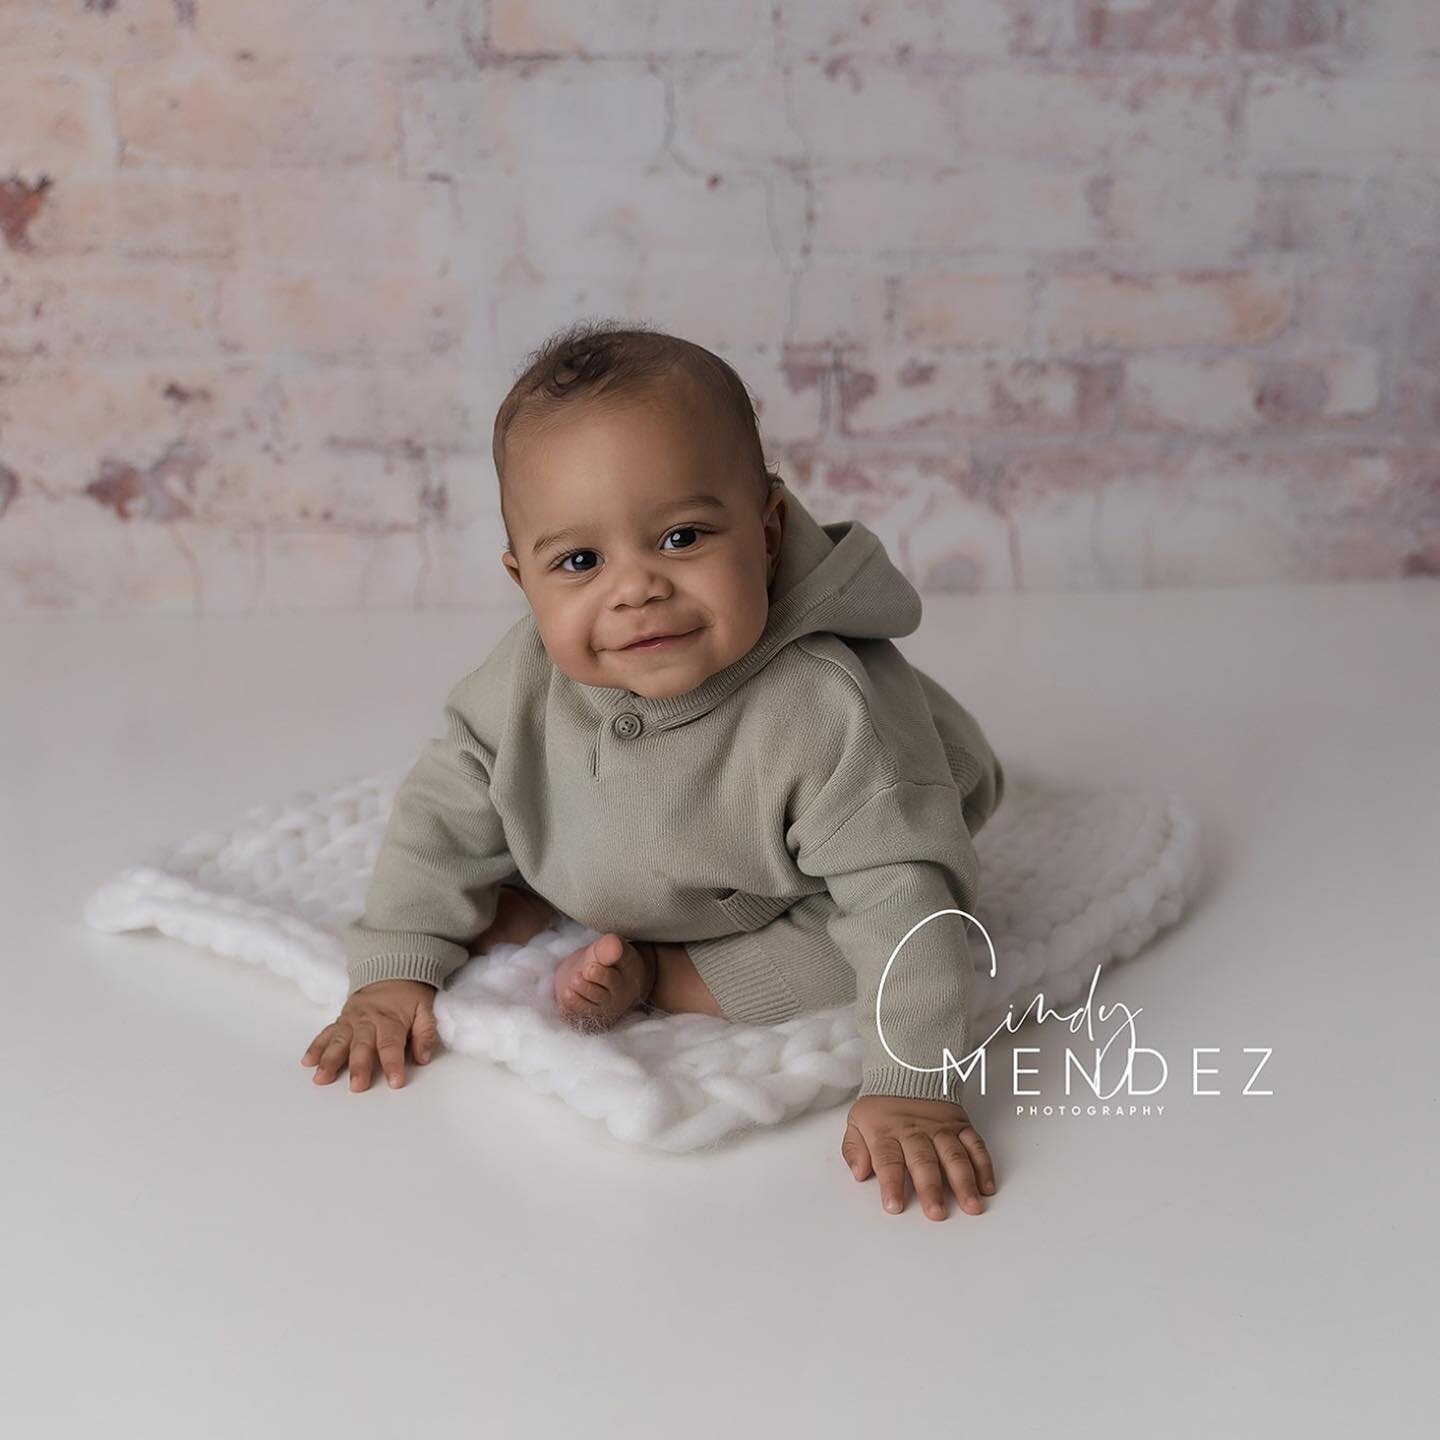 I love it when parents bring back their littles for milestone session! I got to photograph mommy and daddy's maternity session, newborn and now 6 month session. They grow up so fast! #sixmonths #milestones #6month #boy #babyboy #smiles #richildrenpho